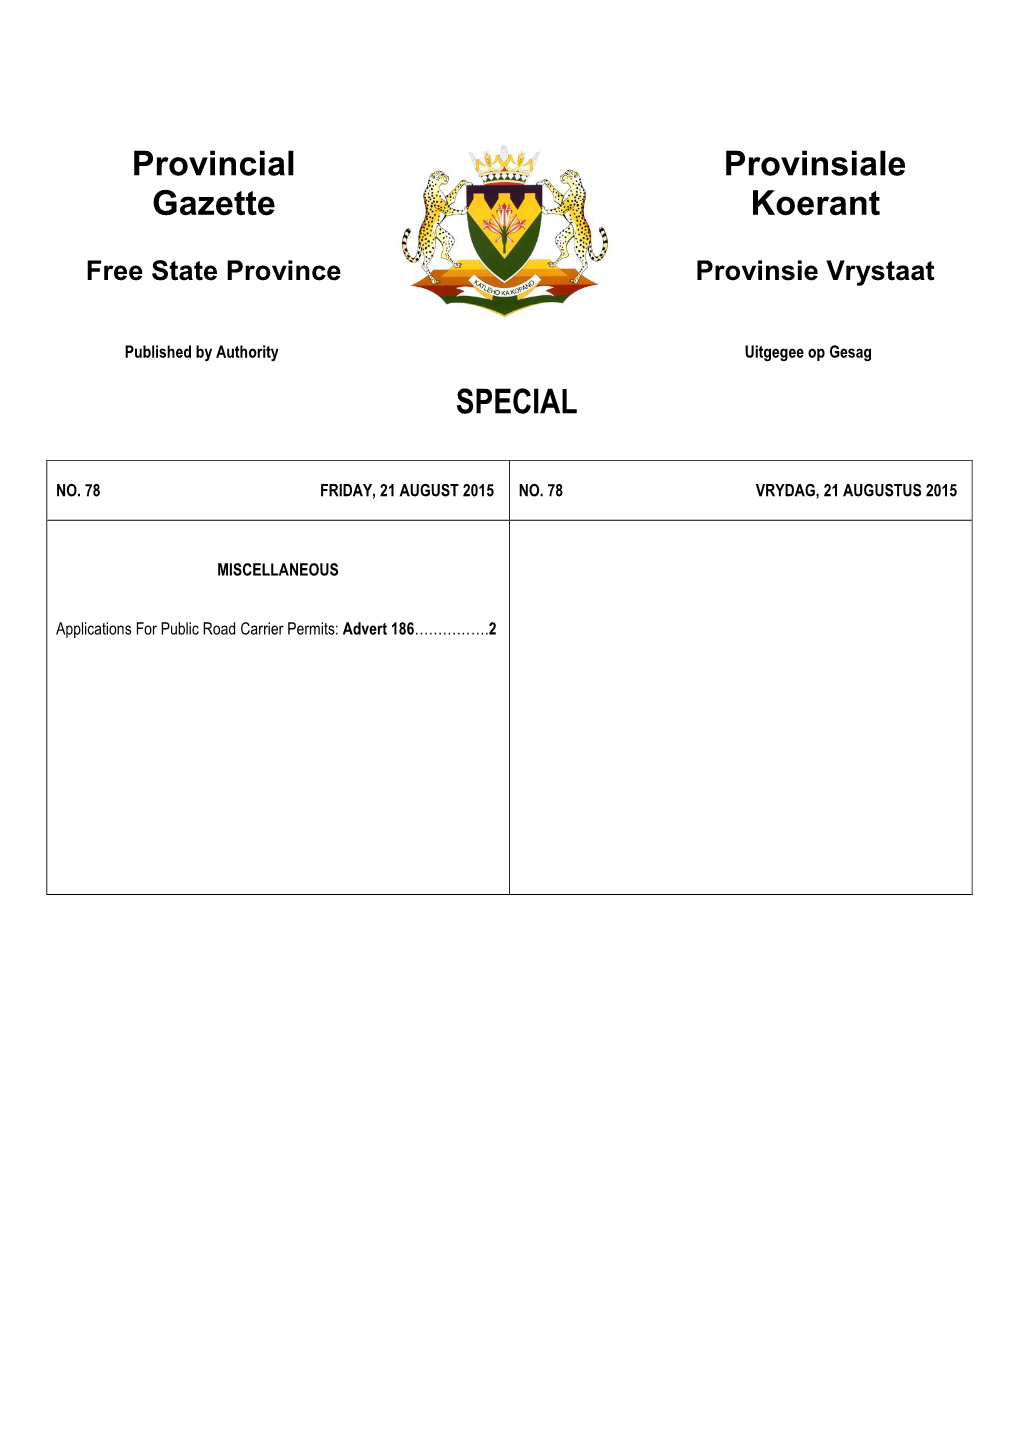 Provincial Gazette for Free State No 78 of 21-August-2015